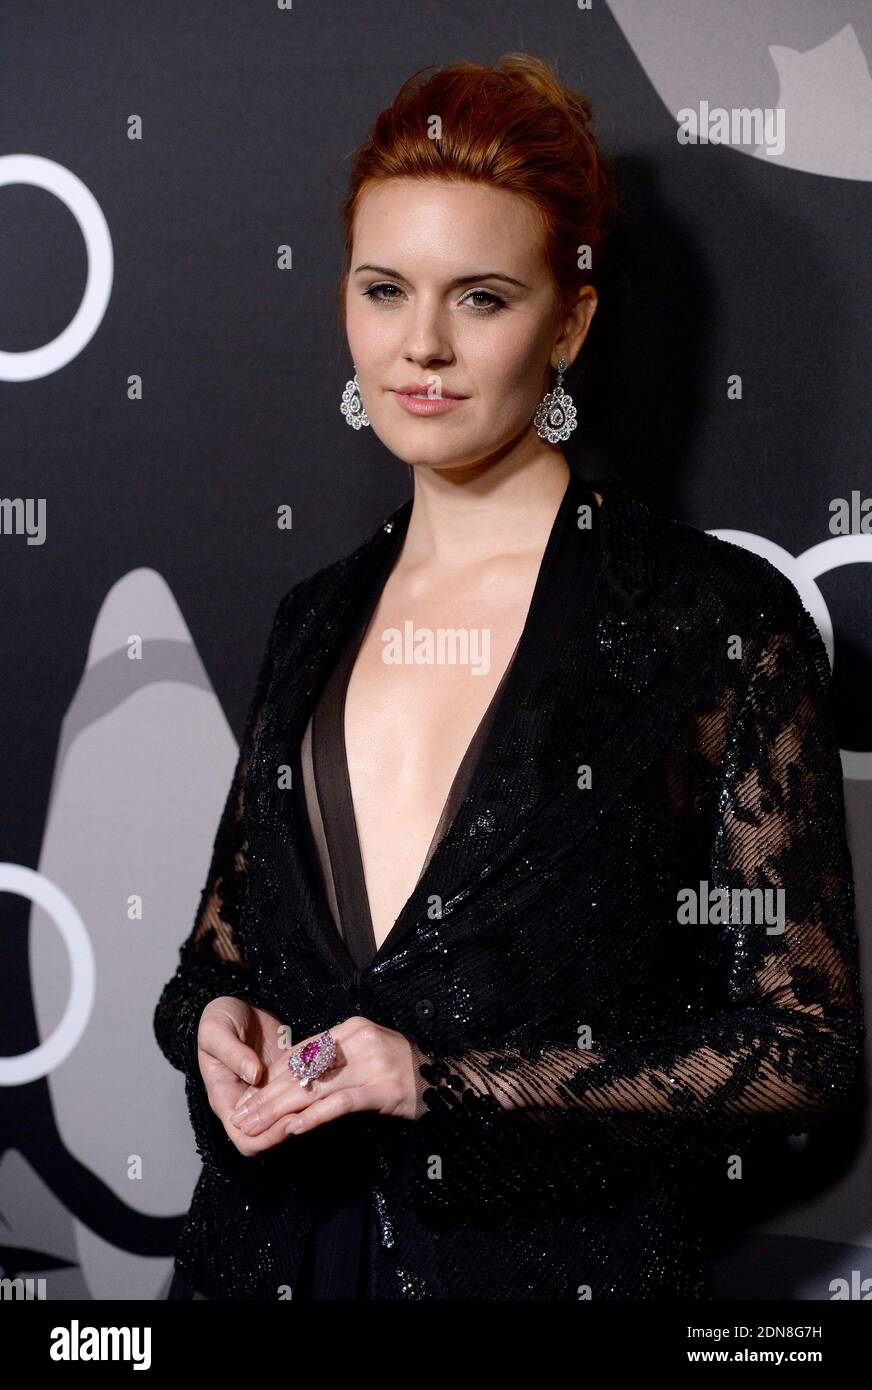 Maggie Grace attends Audi celebrates Golden Globes Week 2015 at Cecconi's Restaurant in Los Angeles, CA, USA, on January 8, 2015. Photo by Lionel Hahn/ABACAPRESS.COM Stock Photo